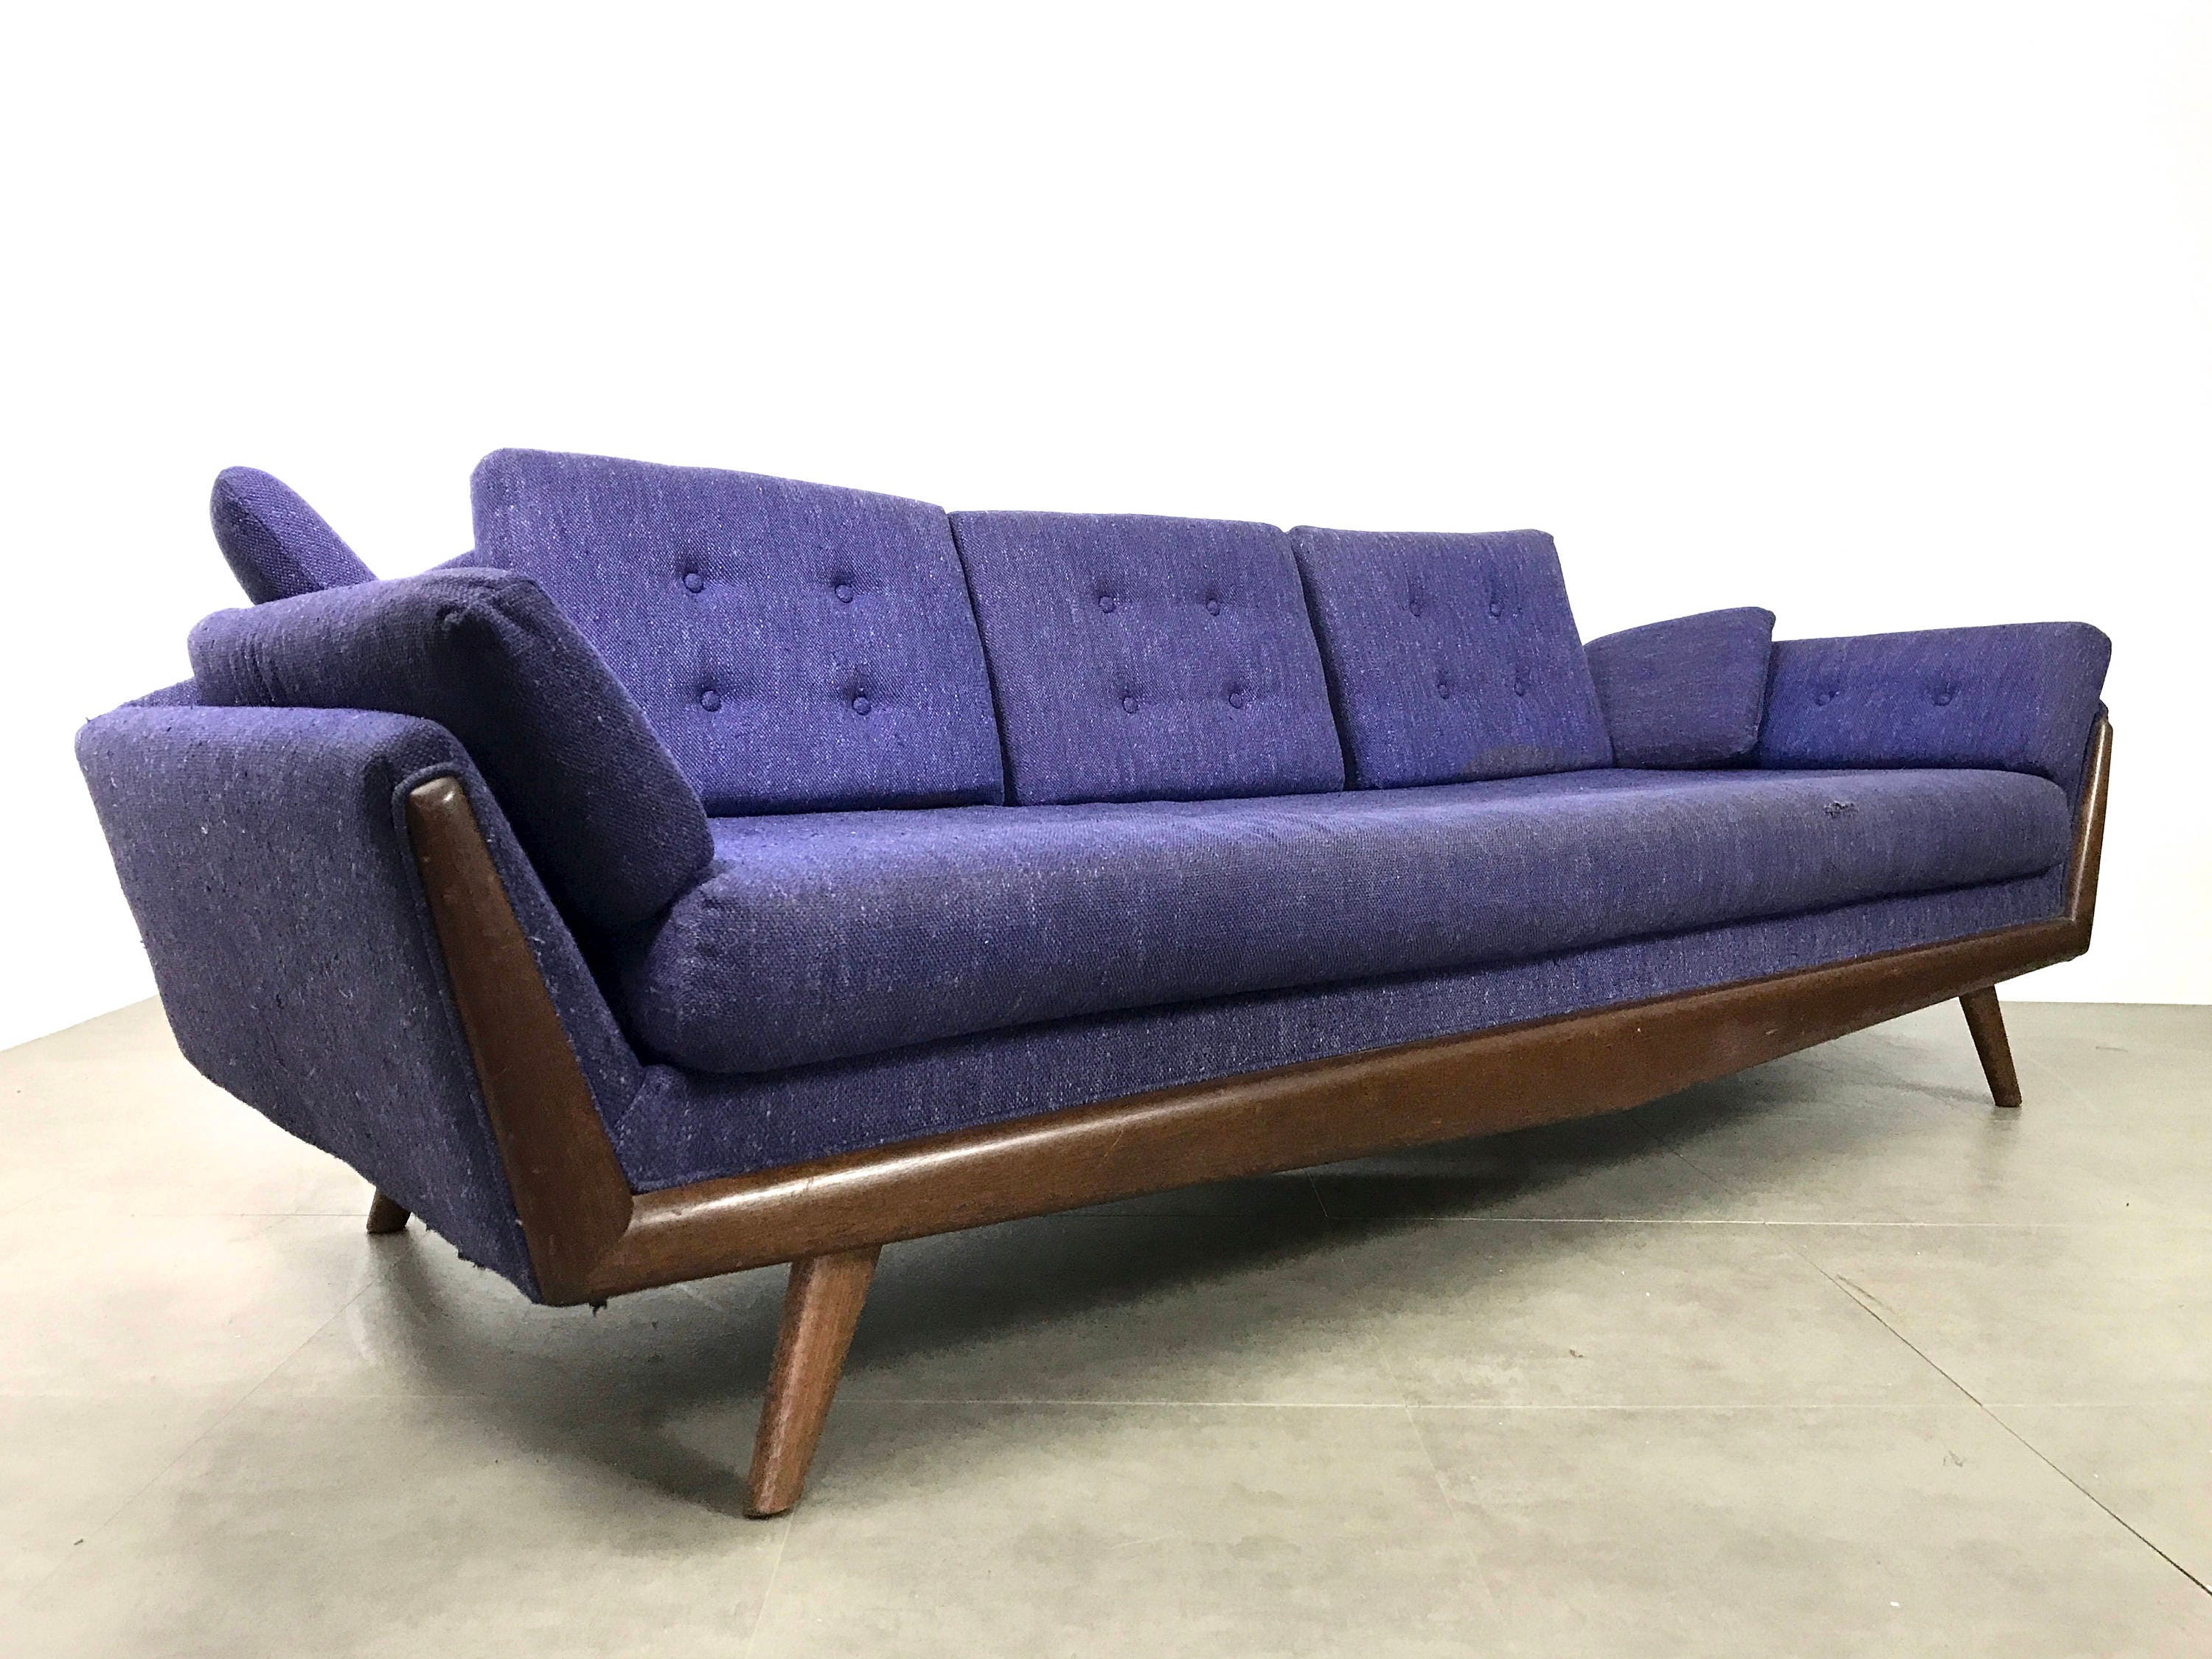 ON HOLD Vintage Adrian Pearsall Style Sofa c1960's